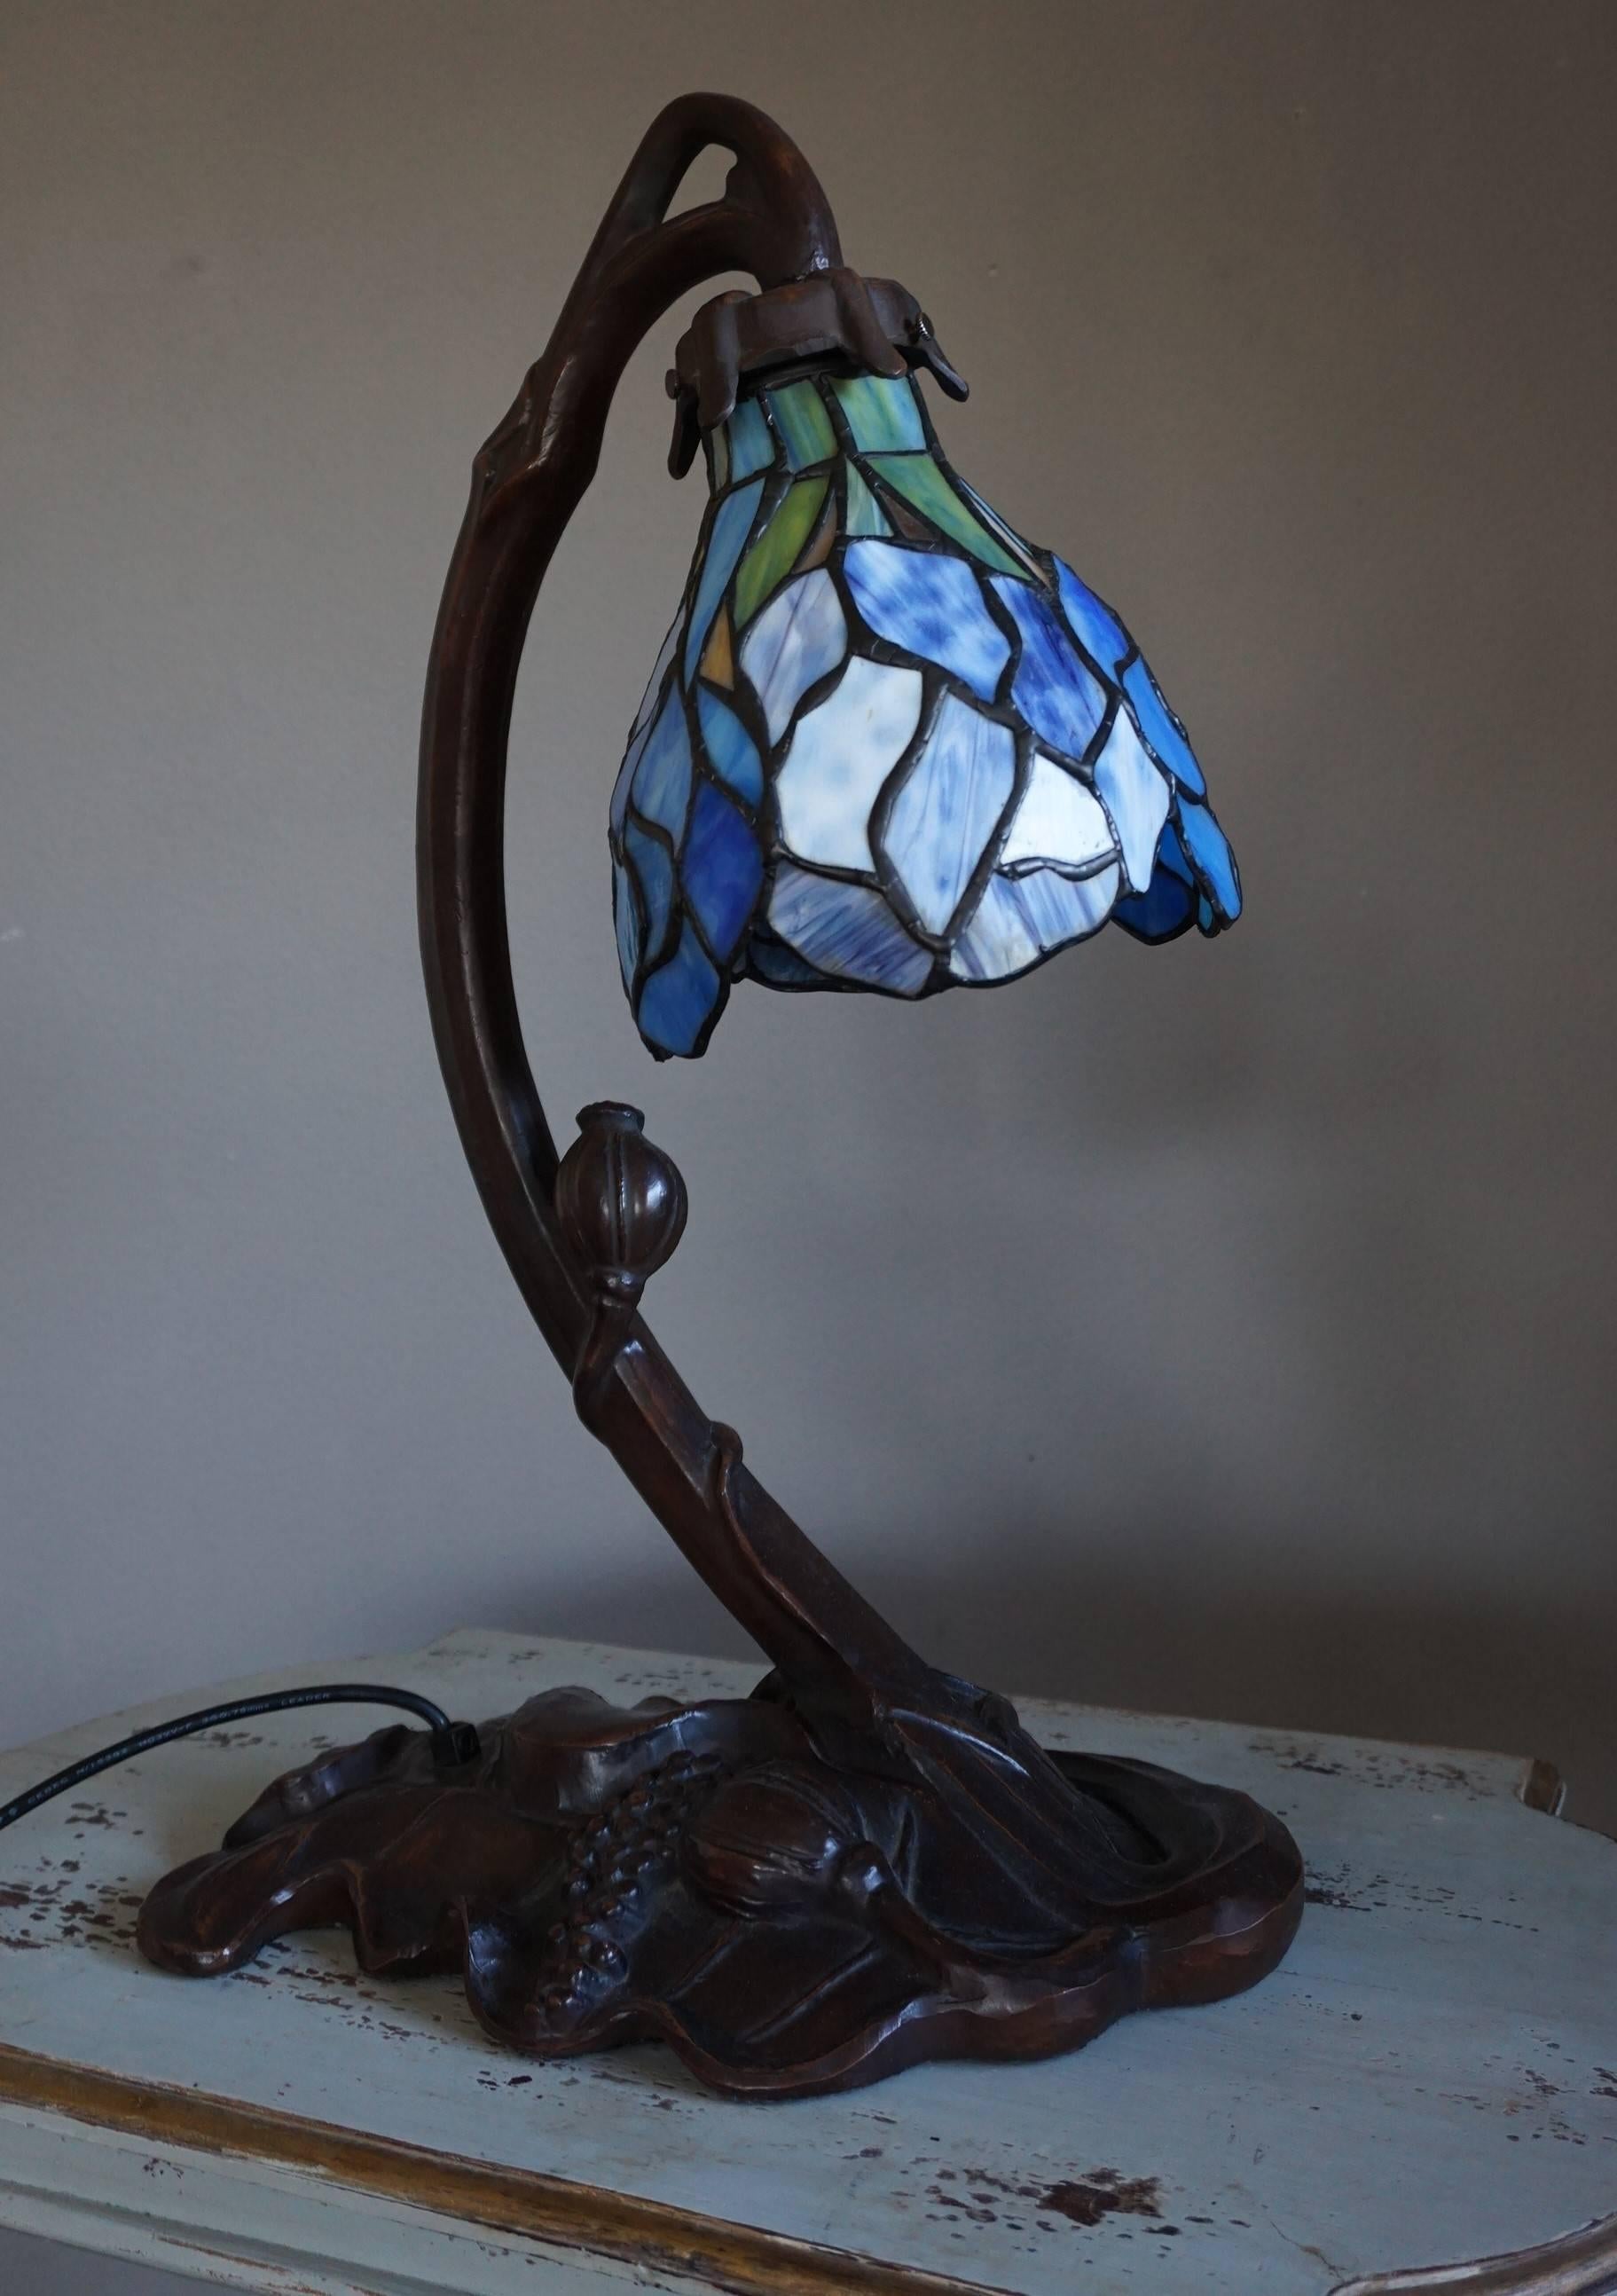 Beautiful shape, colors and condition table lamp.

This elegantly shaped Art Nouveau style table or desk lamp is in excellent condition and it radiates a very organic and calm energy, both on and off. This relatively large and rare example comes